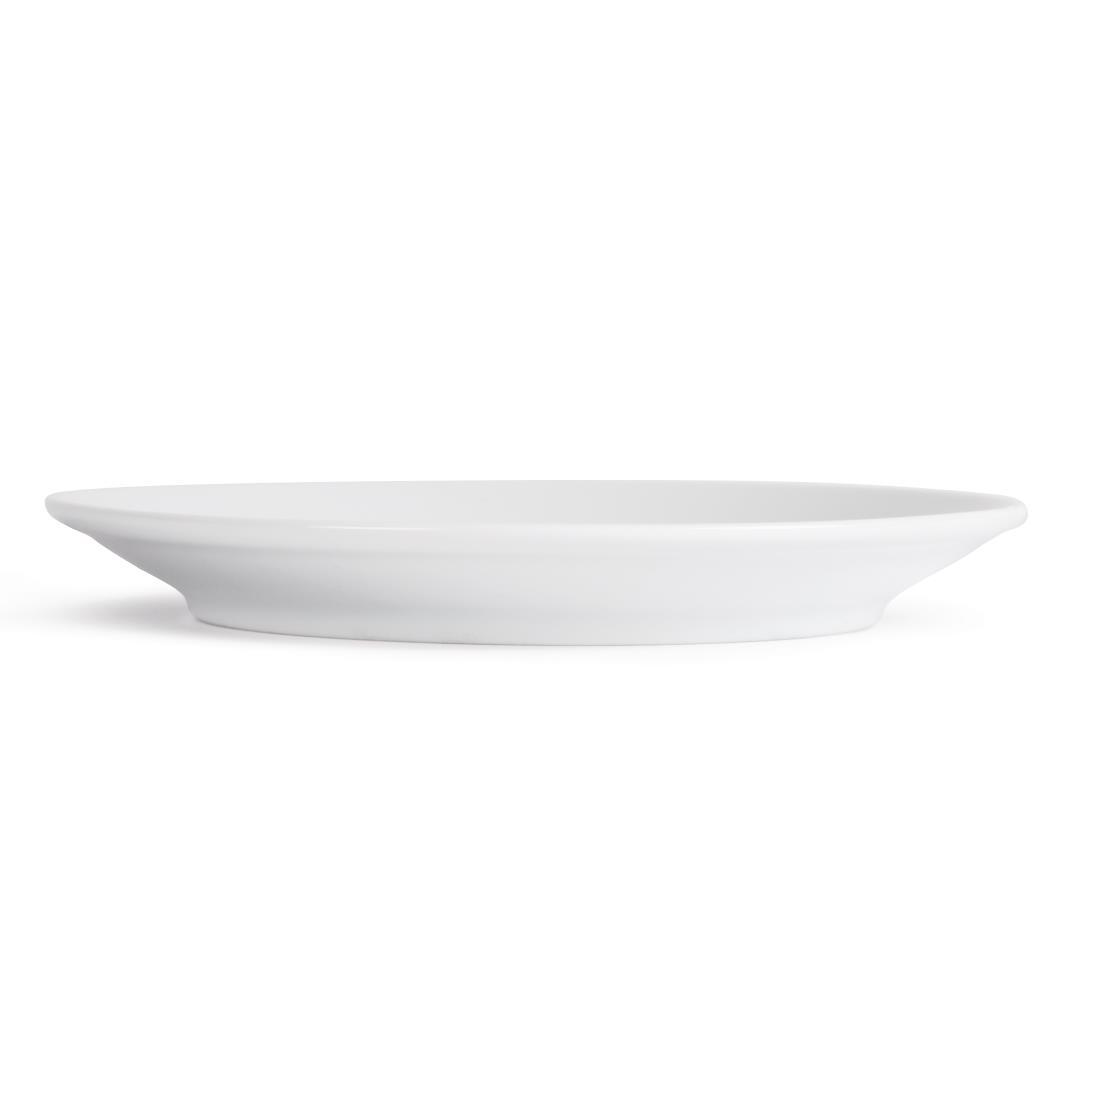 Royal Porcelain Classic White Coupe Plates 150mm (Pack of 12) - CG001  - 4